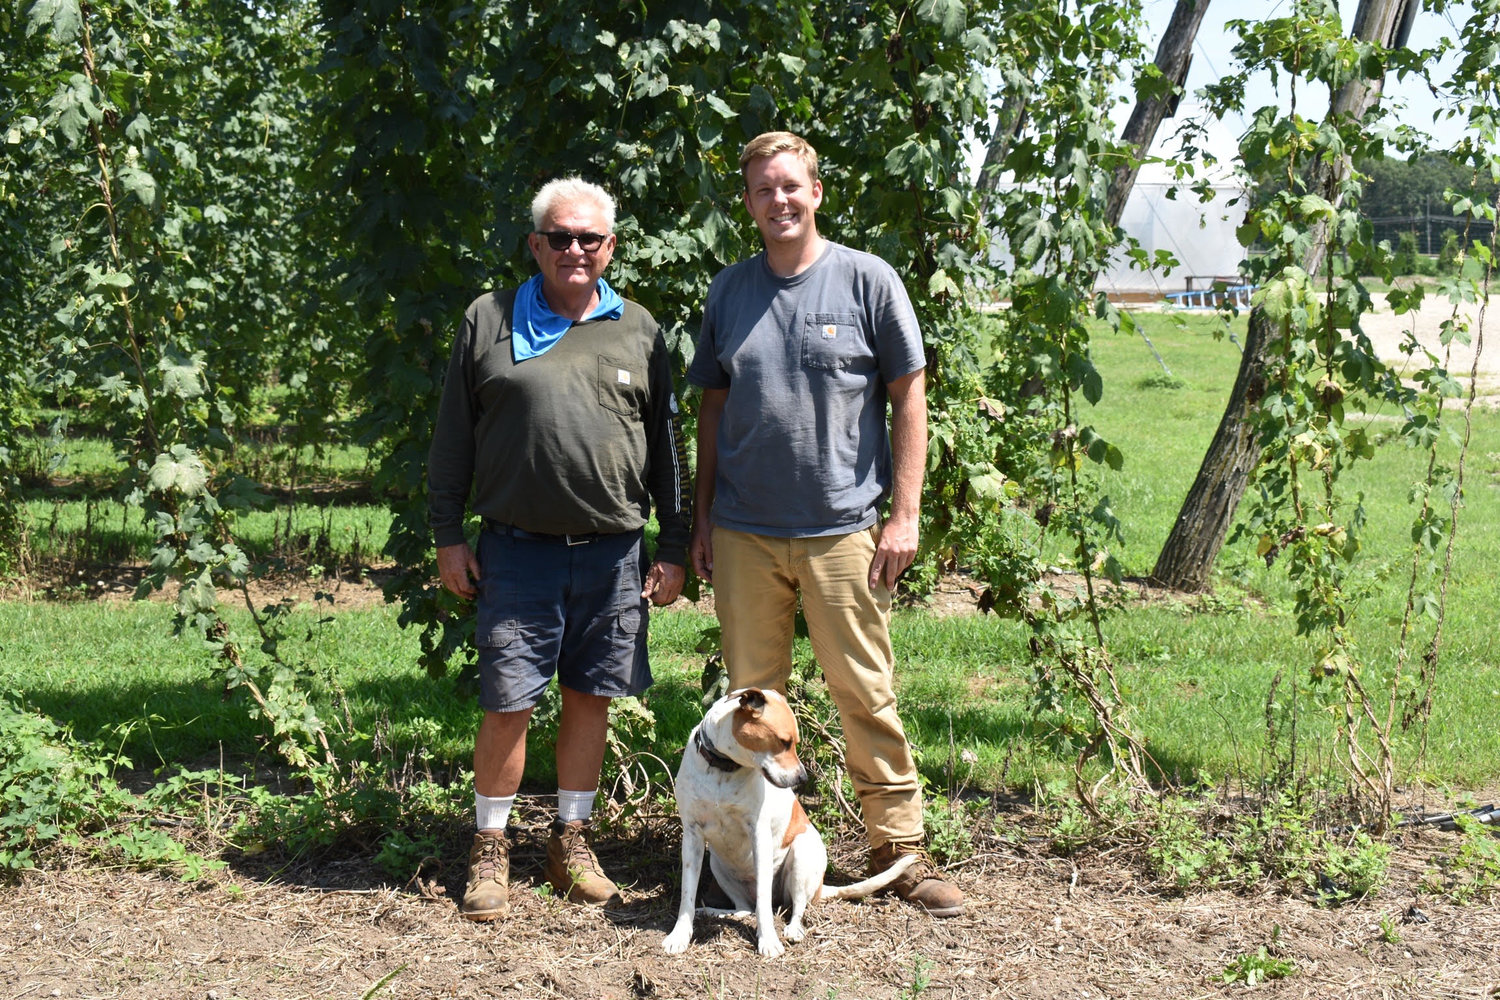 Mark Carroll (left) is pictured with Ryan Andoos (right) and Shelby (front, center) in front of a hops plant.